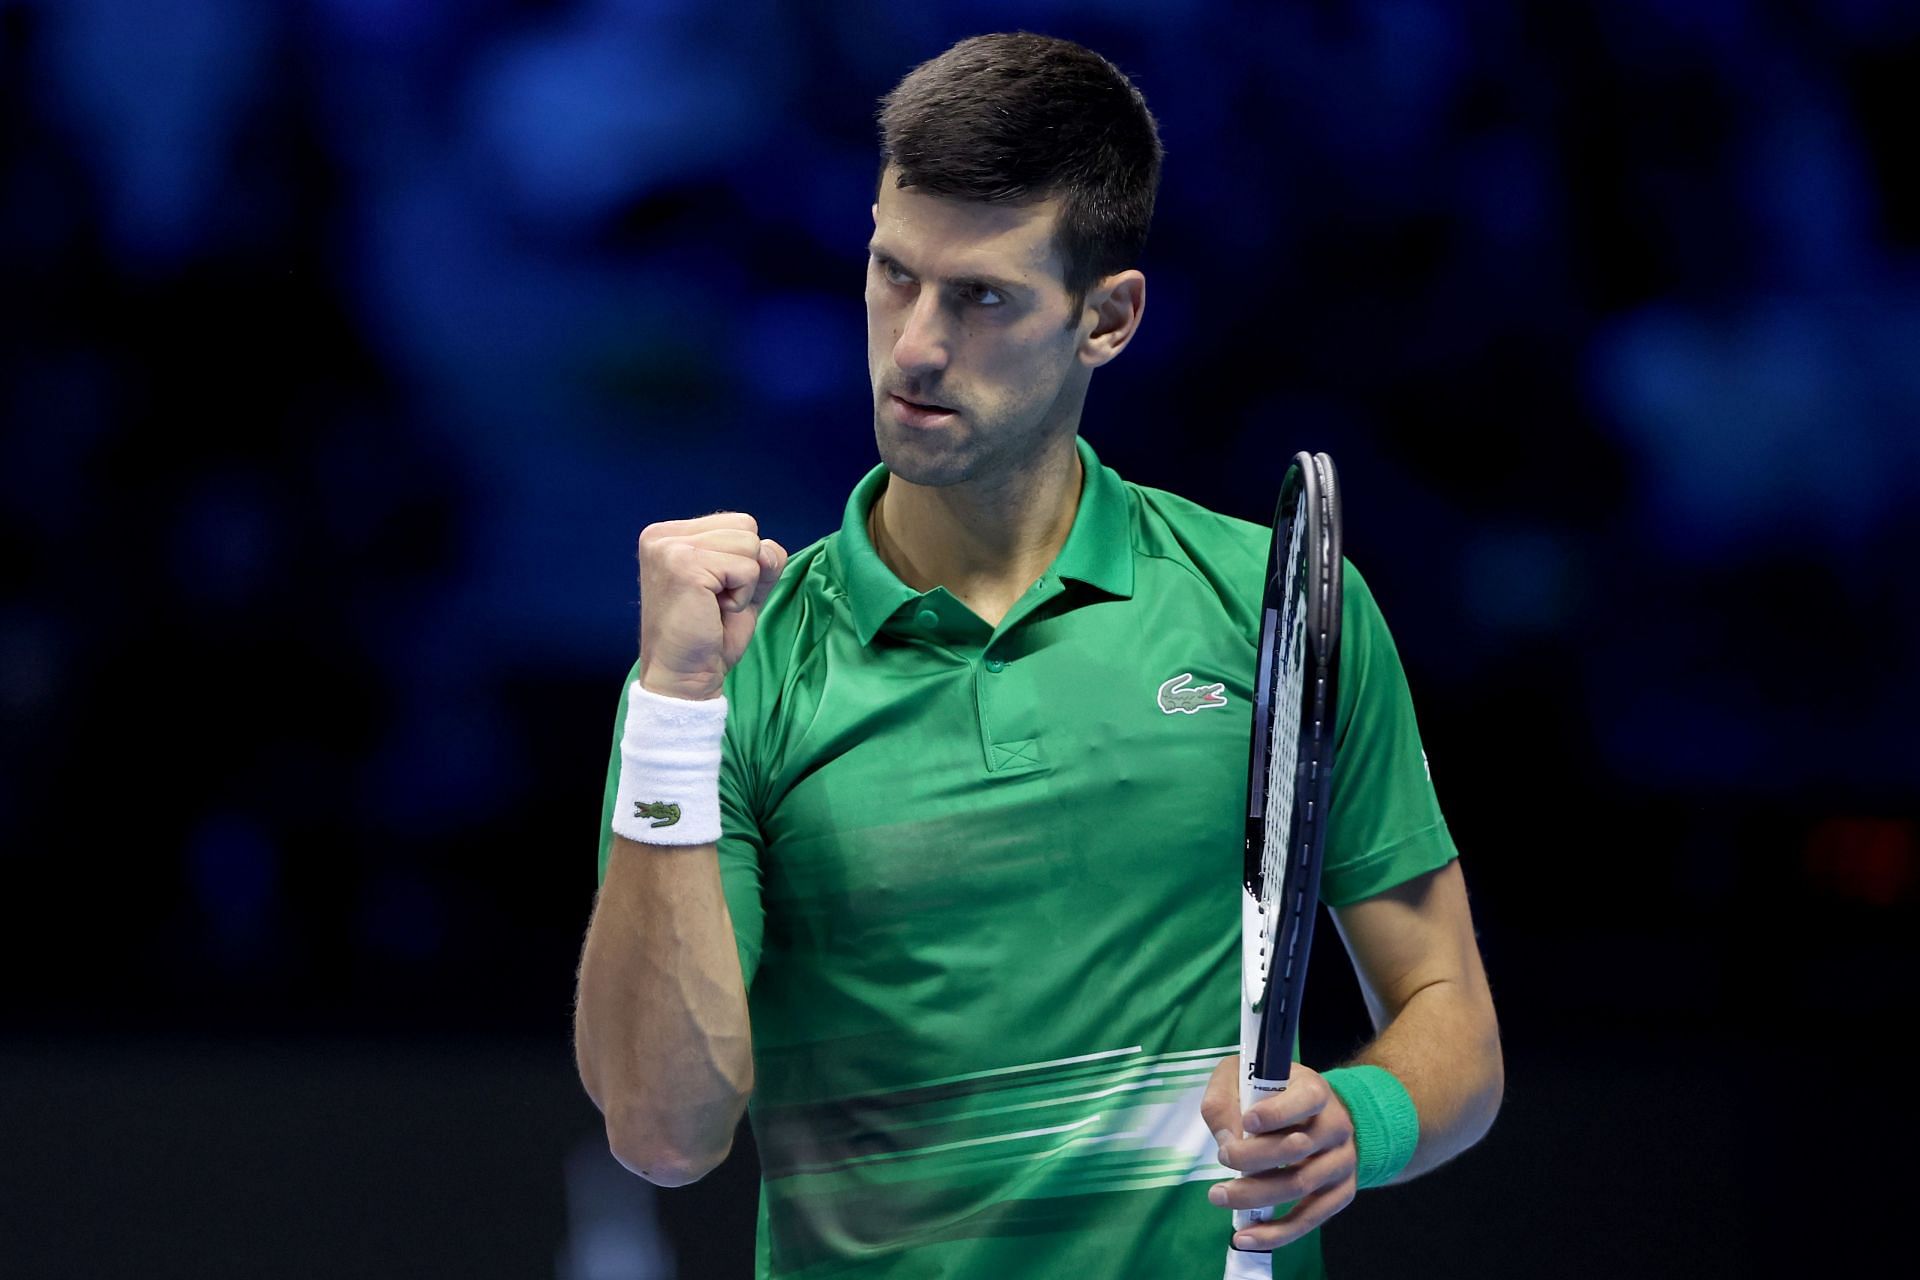 Novak Djokovic in action at the 2022 ATP Finals in Turin.